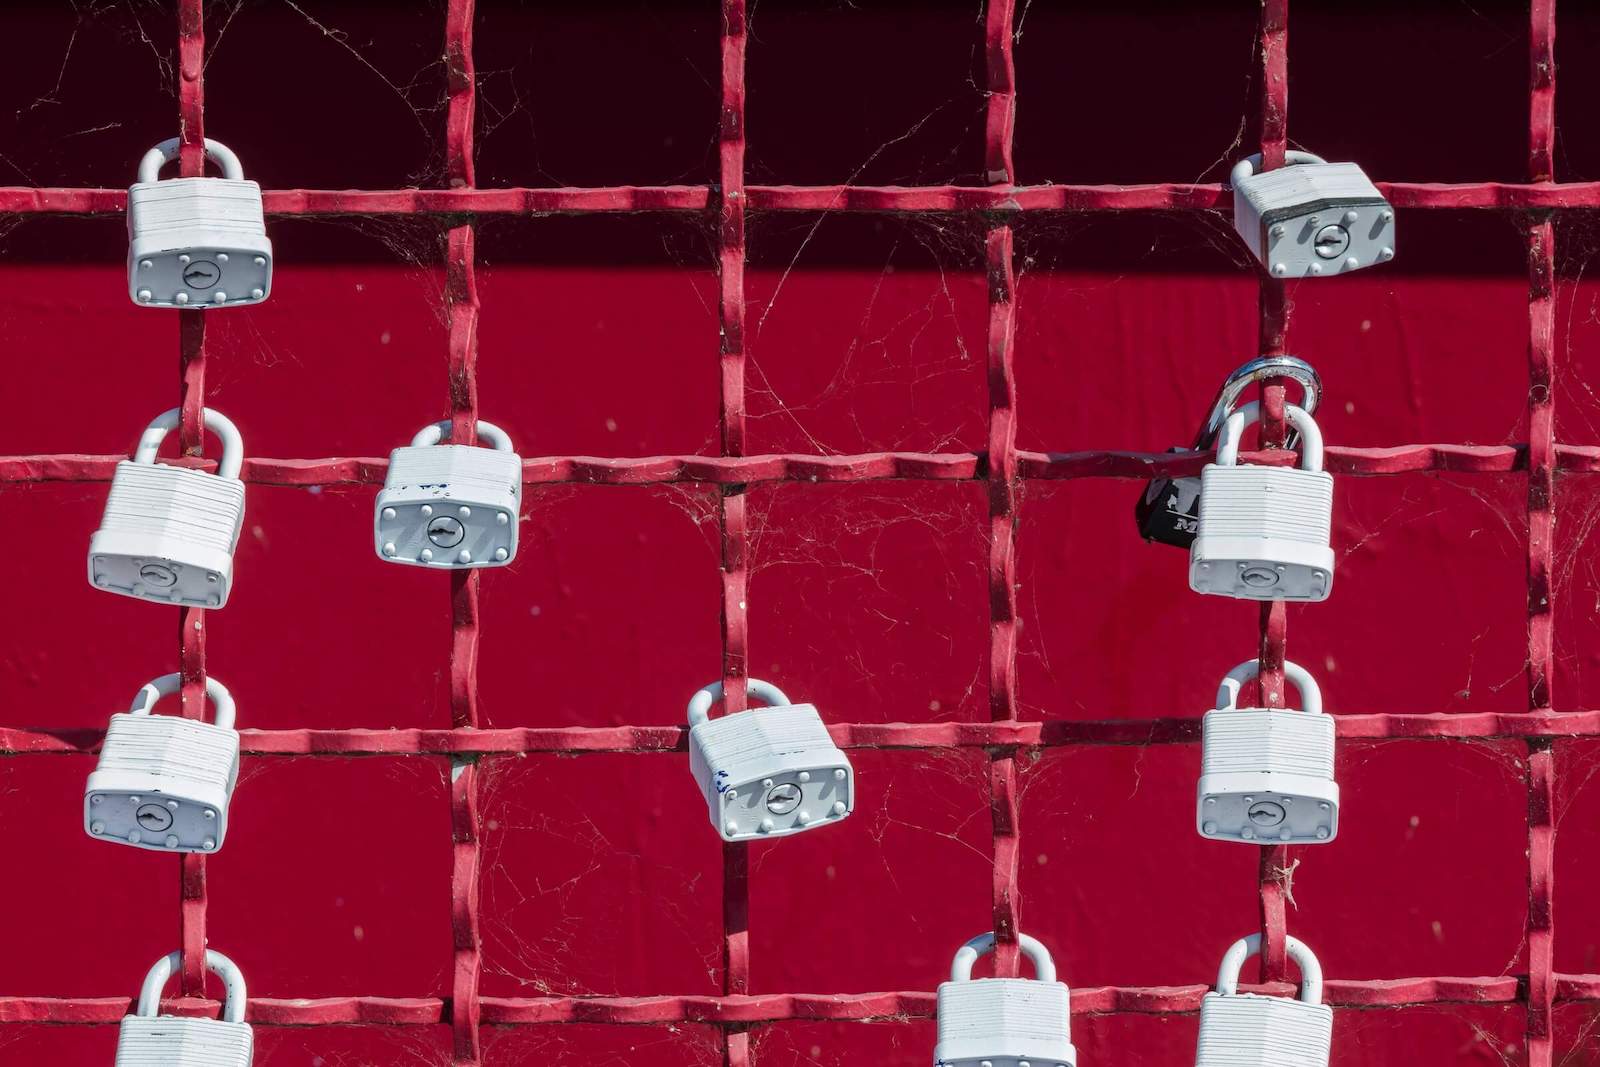 Silver locks on a red metal fence